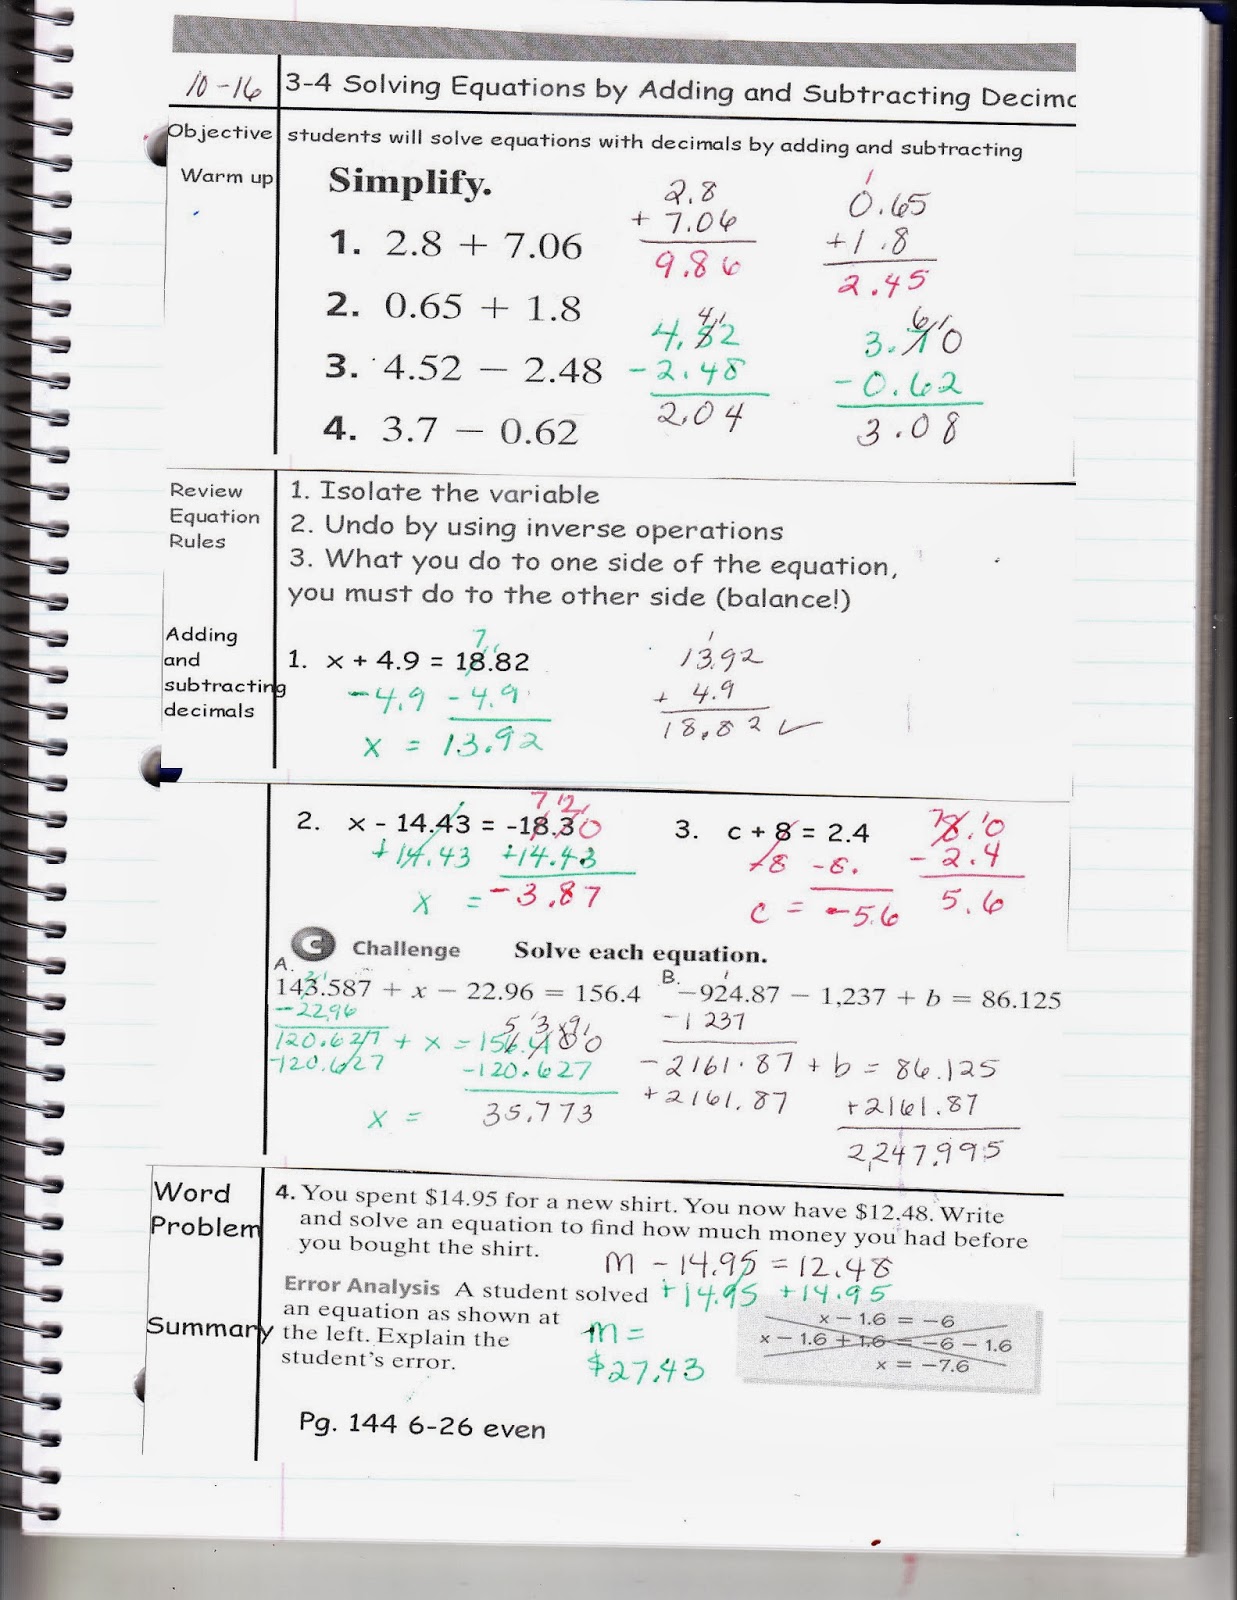 Ms. Jean's Classroom Blog: 3-4 Solving Equations by Adding and